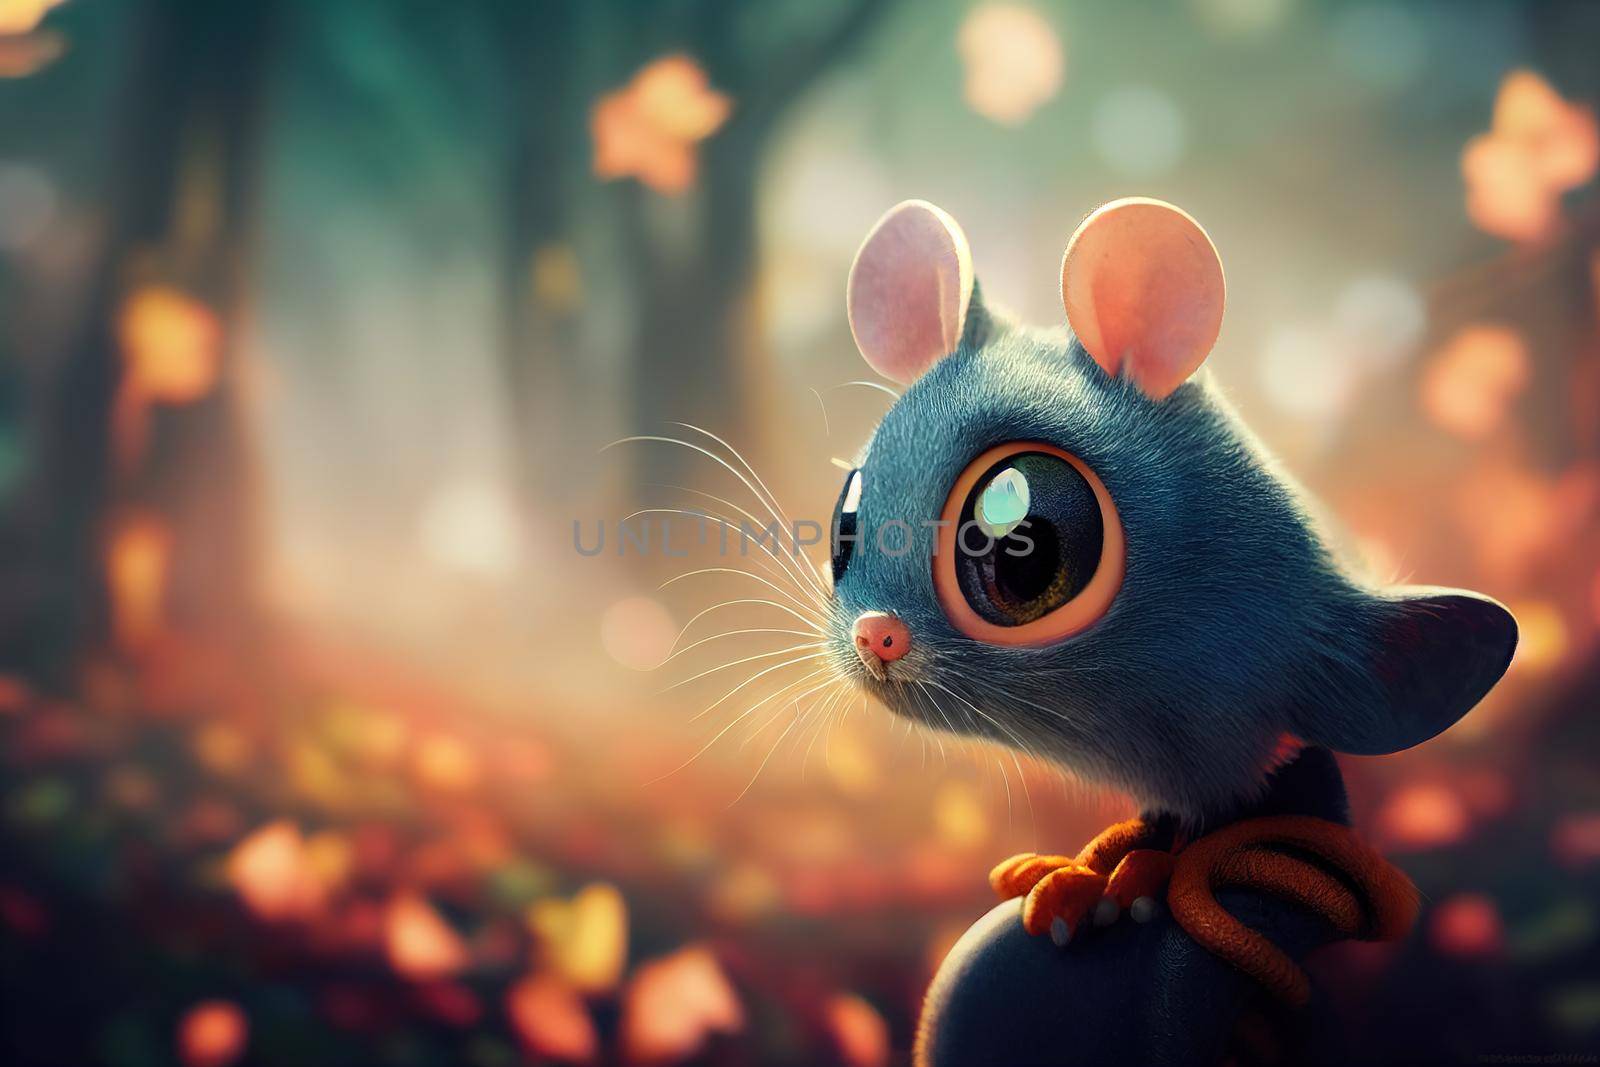 Tiny Blue Mouse Character. High quality 3d illustration